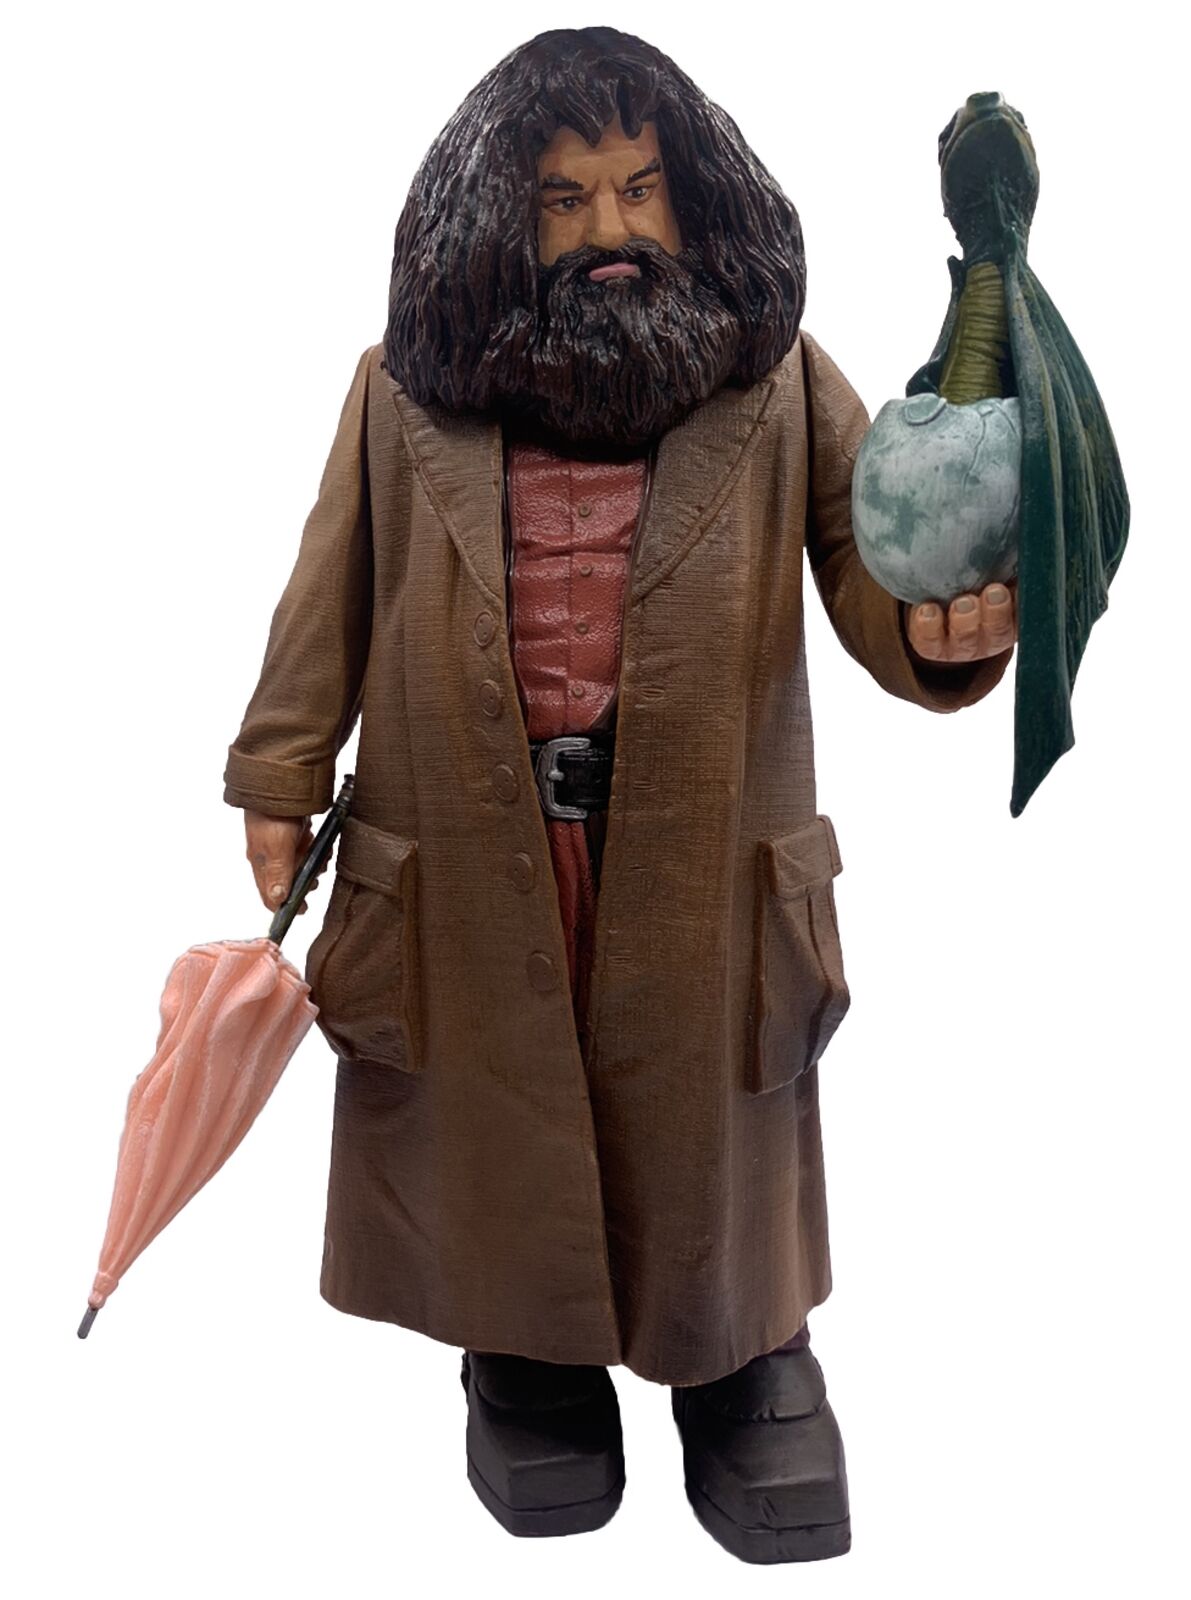 Deluxe Hagrid 2001 Mattel Action Figure Creature Collection W/ Box & Accessories